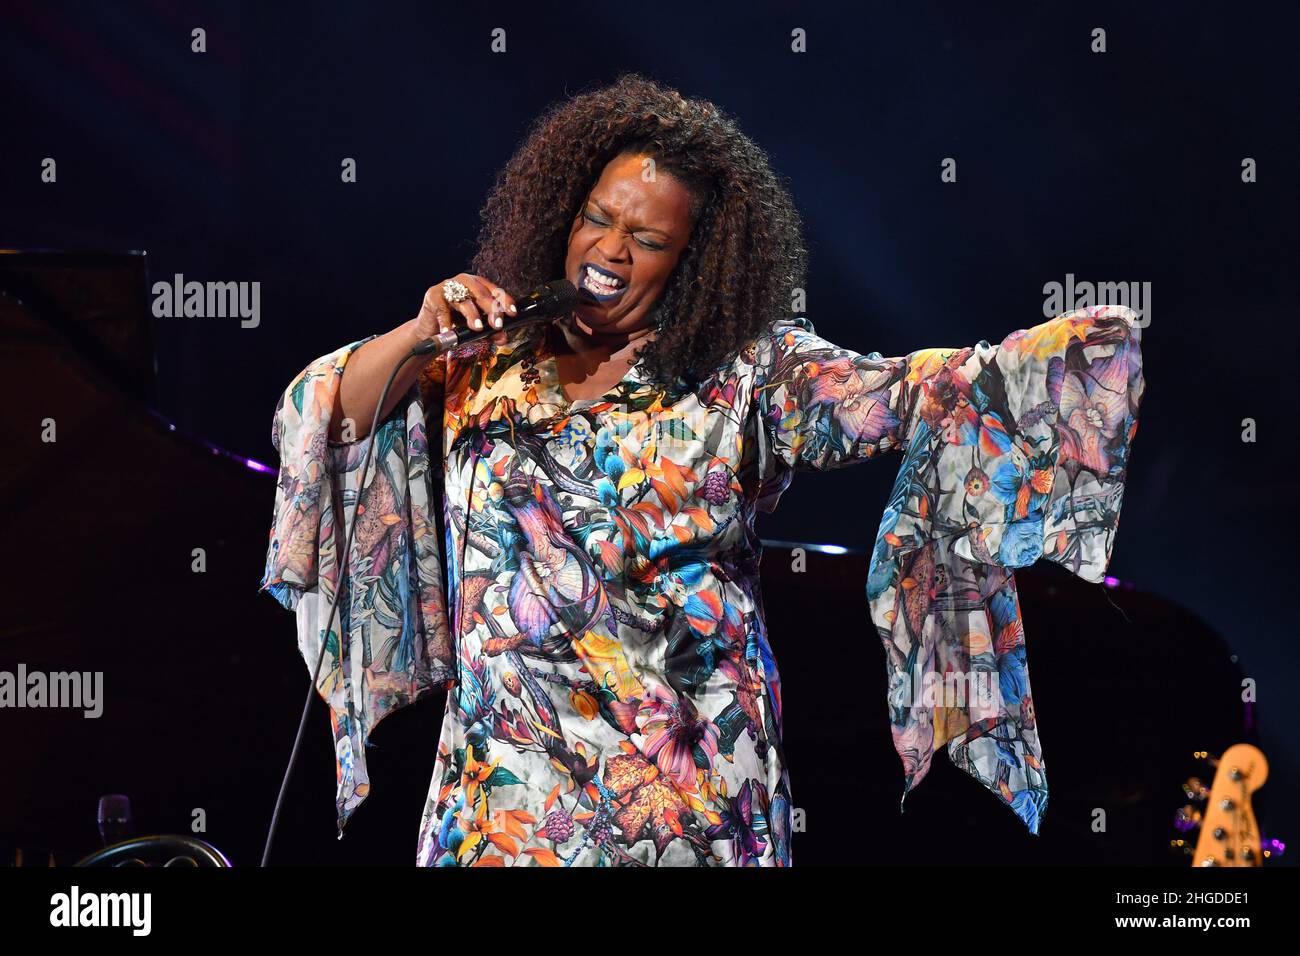 Dianne Reeves performs on the stage during an Seoul Jazz Festival 2017 at Olympic Park in Seoul, South Korea. Seoul Jazz Festival, a local festival that has grown into a representative spring festival over a decade, will take place at Seoul Olympic Park on May 27 and 28. This year the festival invited many prominent jazz artists including Jamiroquai, a British funk and acid jazz band, which returns to Seoul for the first time in four years. The Grammy Award-winning band with a large local fan base will play classic disco-funk from their new album 'Automaton.' Jazz diva Dianne Reeves, R&B-based Stock Photo